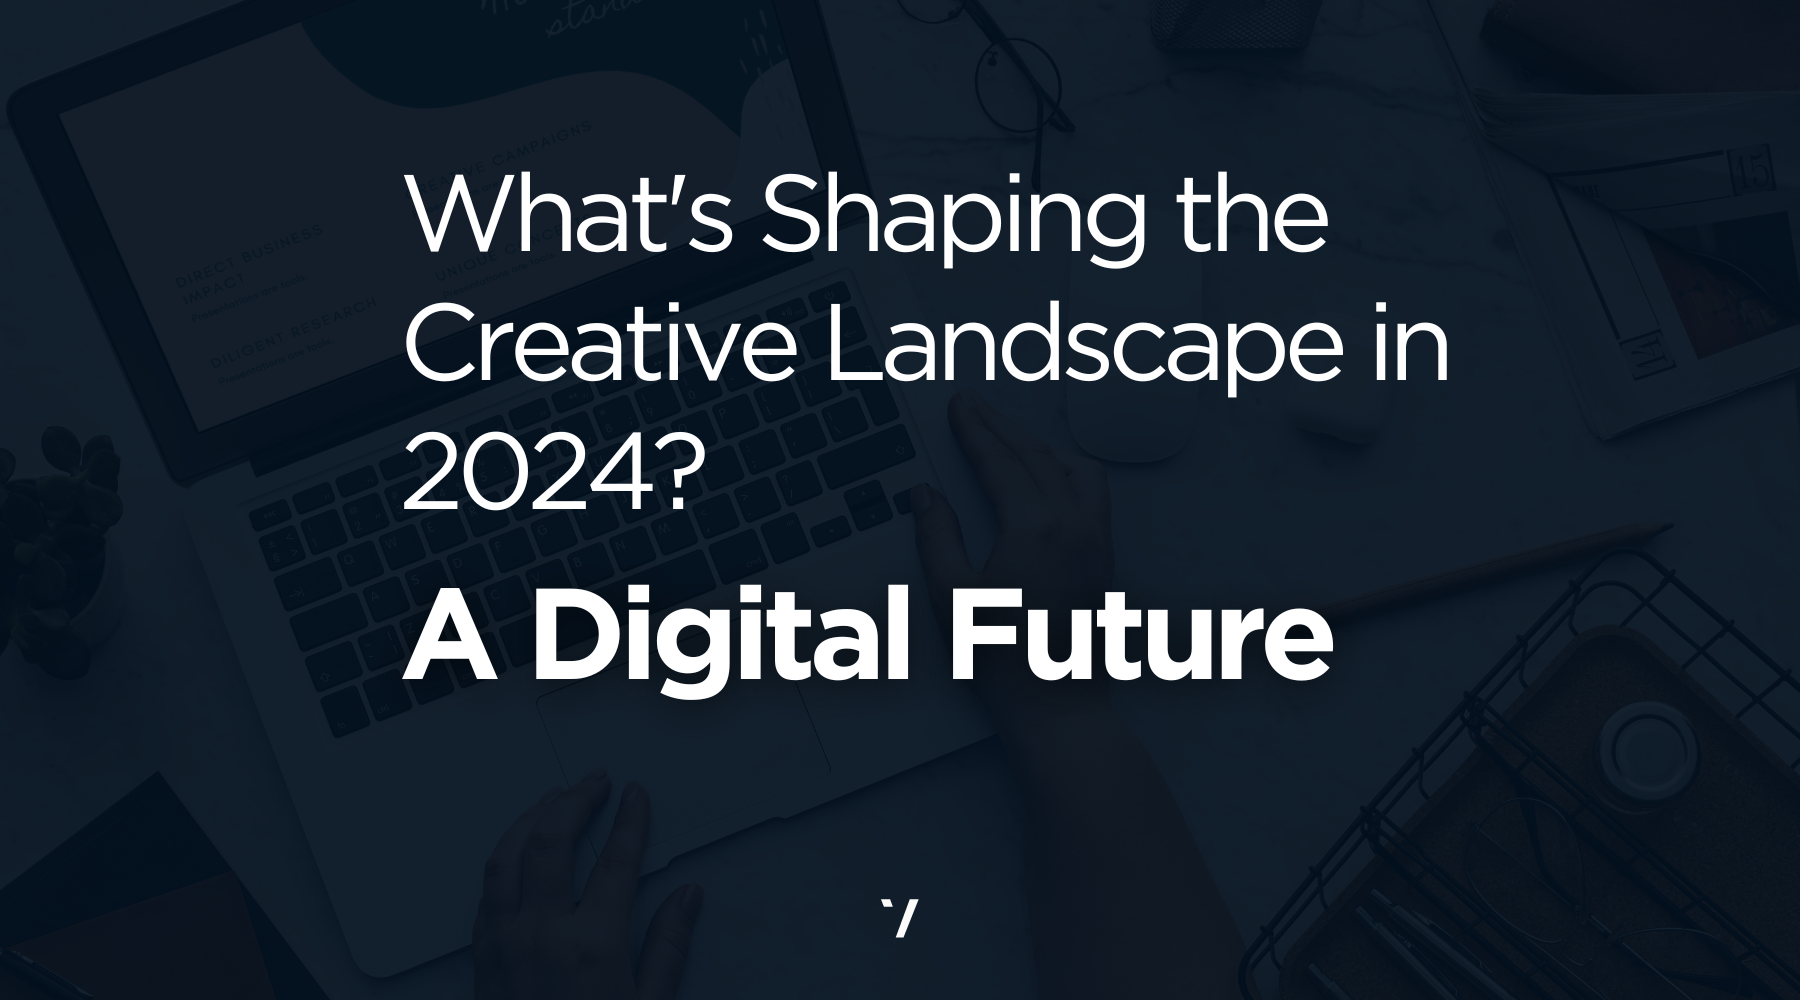 What's Shaping the Creative Landscape in 2024